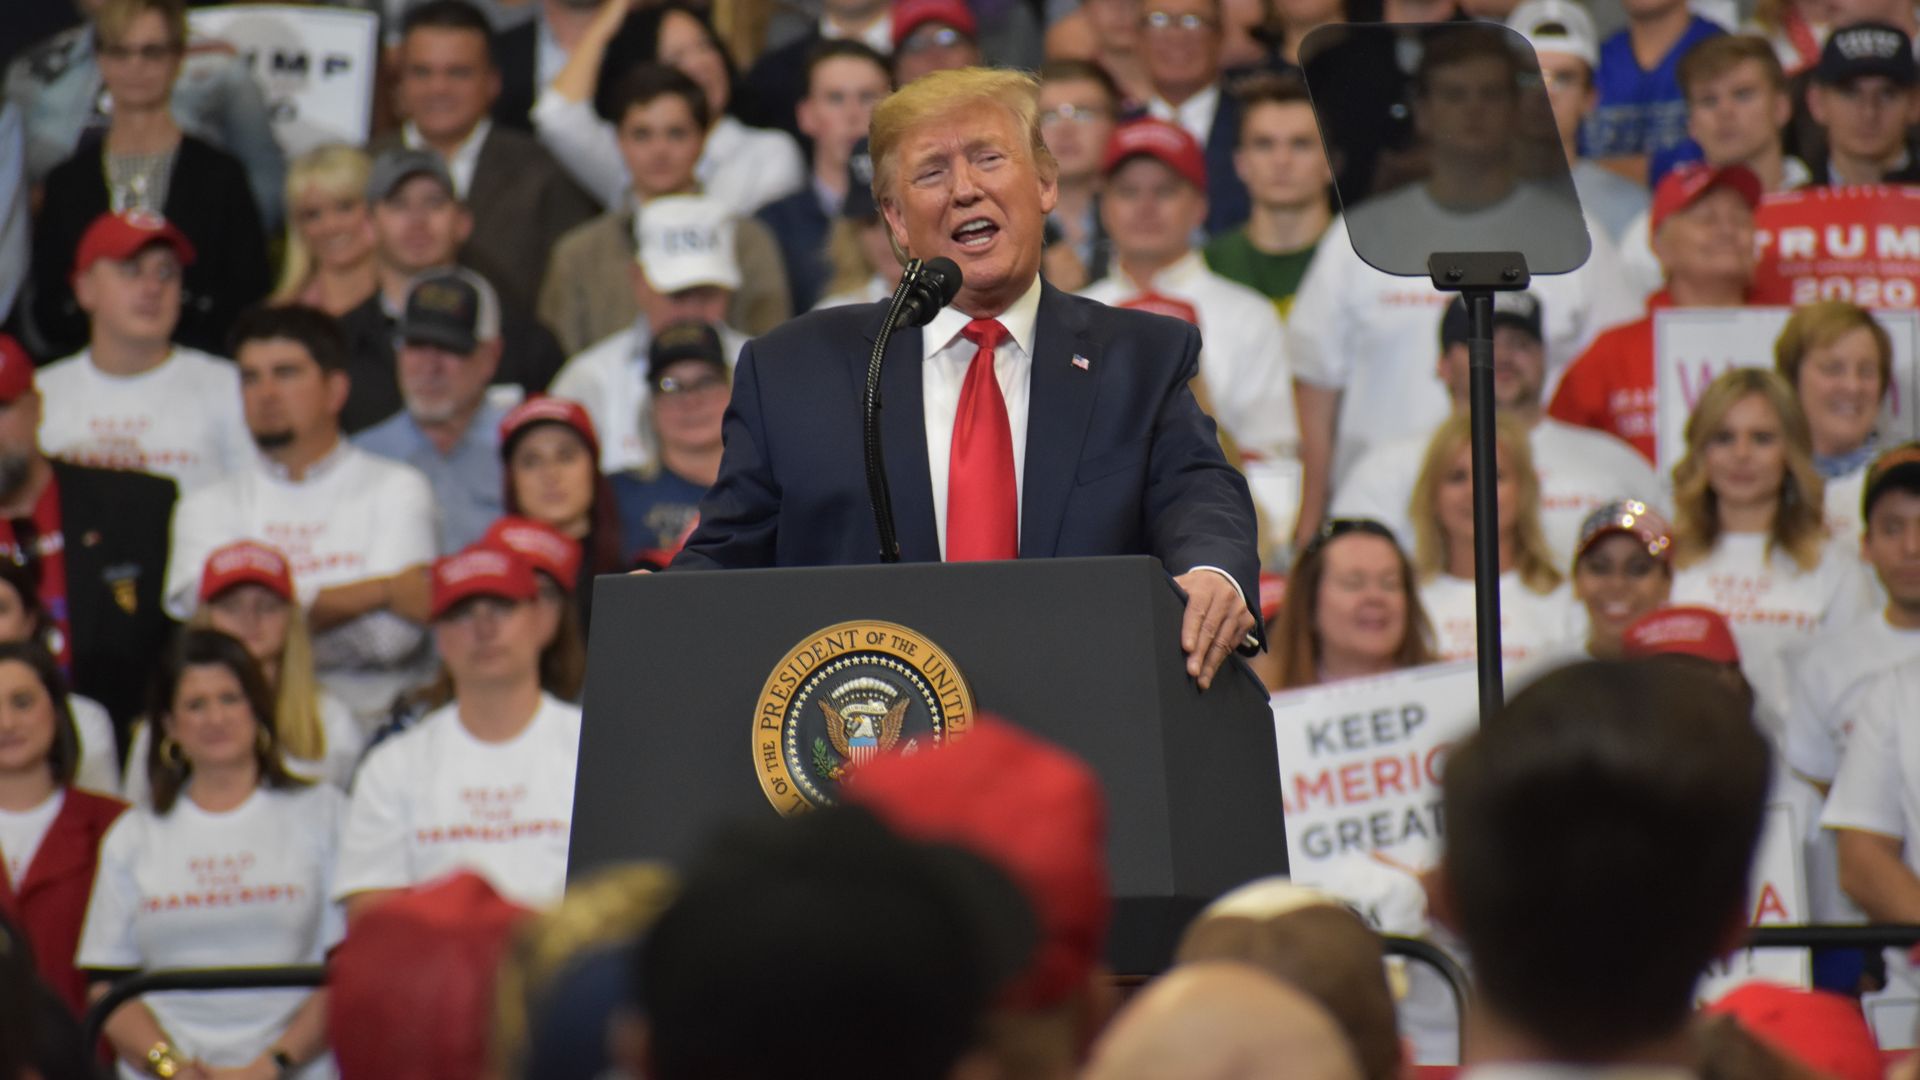  President Donald J. Trump delivers remarks at a 'Keep America Great' rally in Lexington, Kentucky